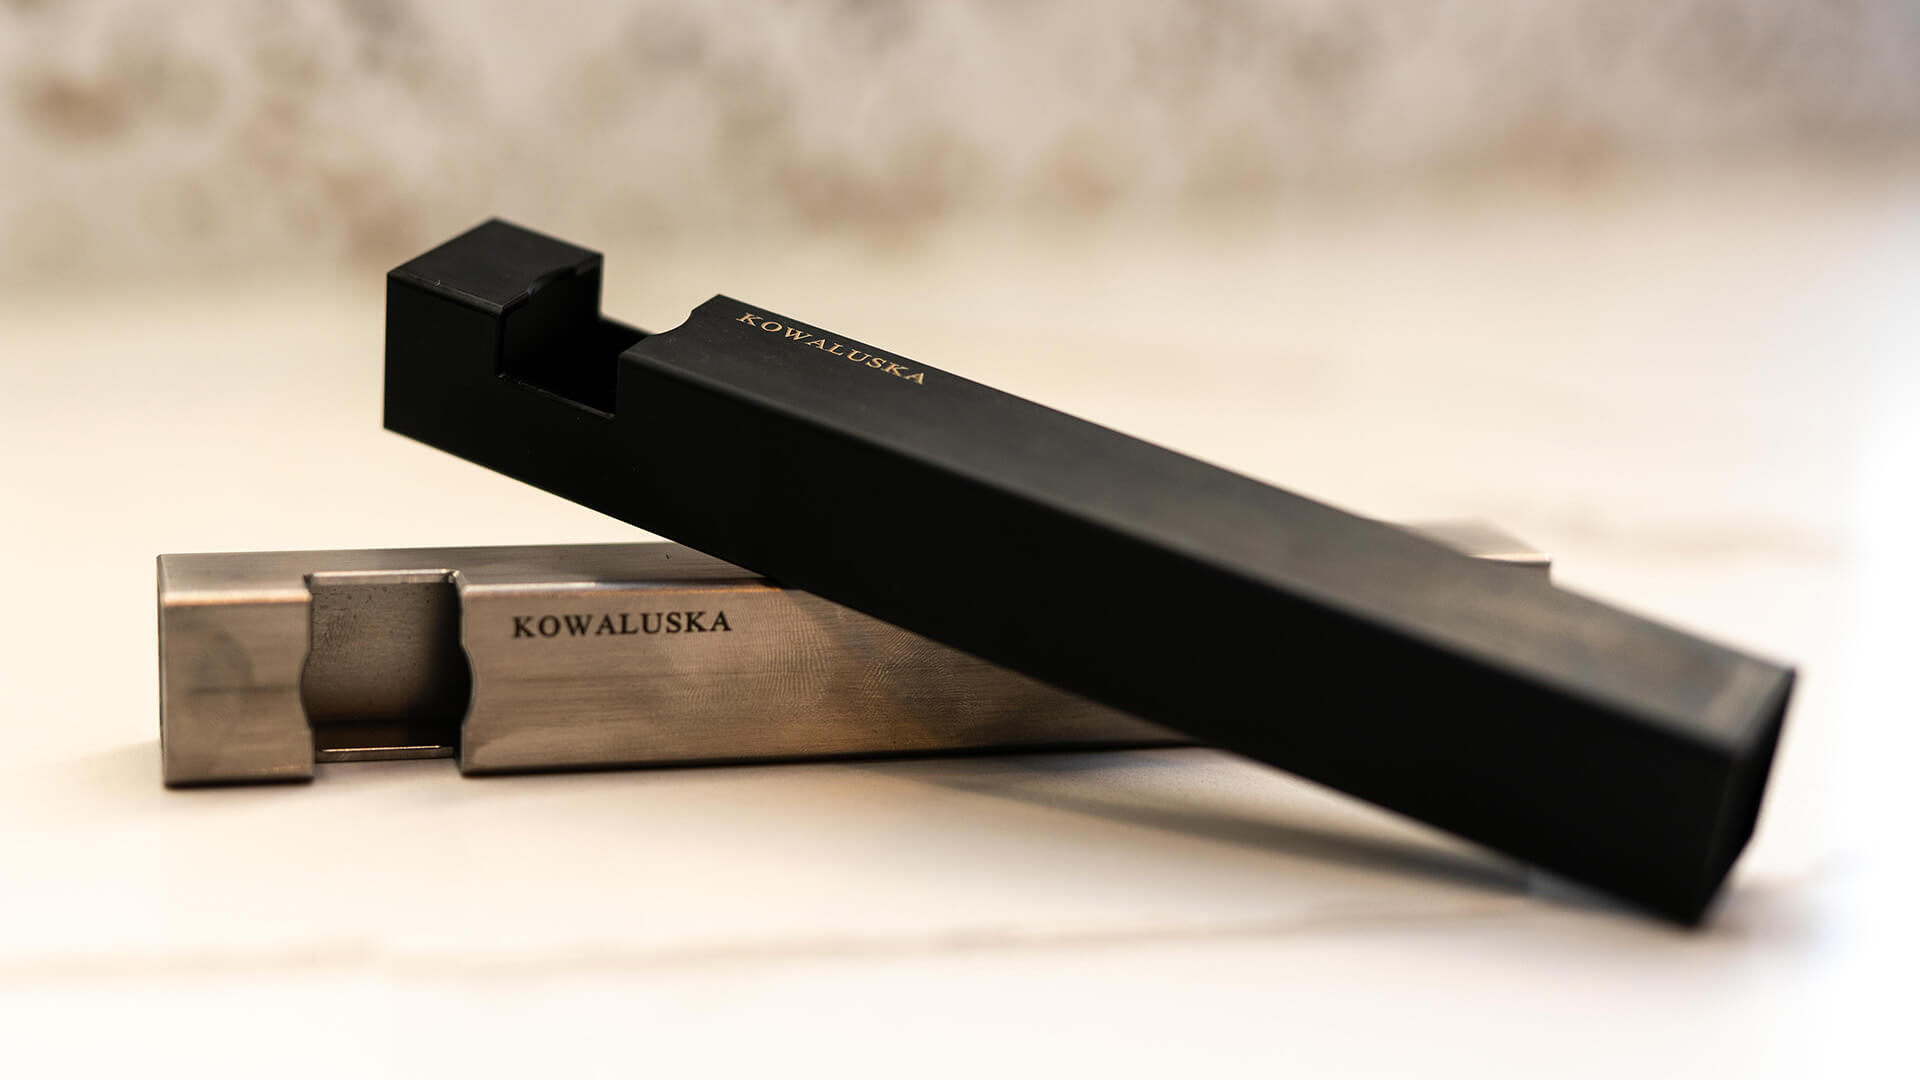 A pair of unique-bar-shaped bottle openers shown. One has the black oxide coating and the other one is shown in our aeroapace grade 300 series stainless steel